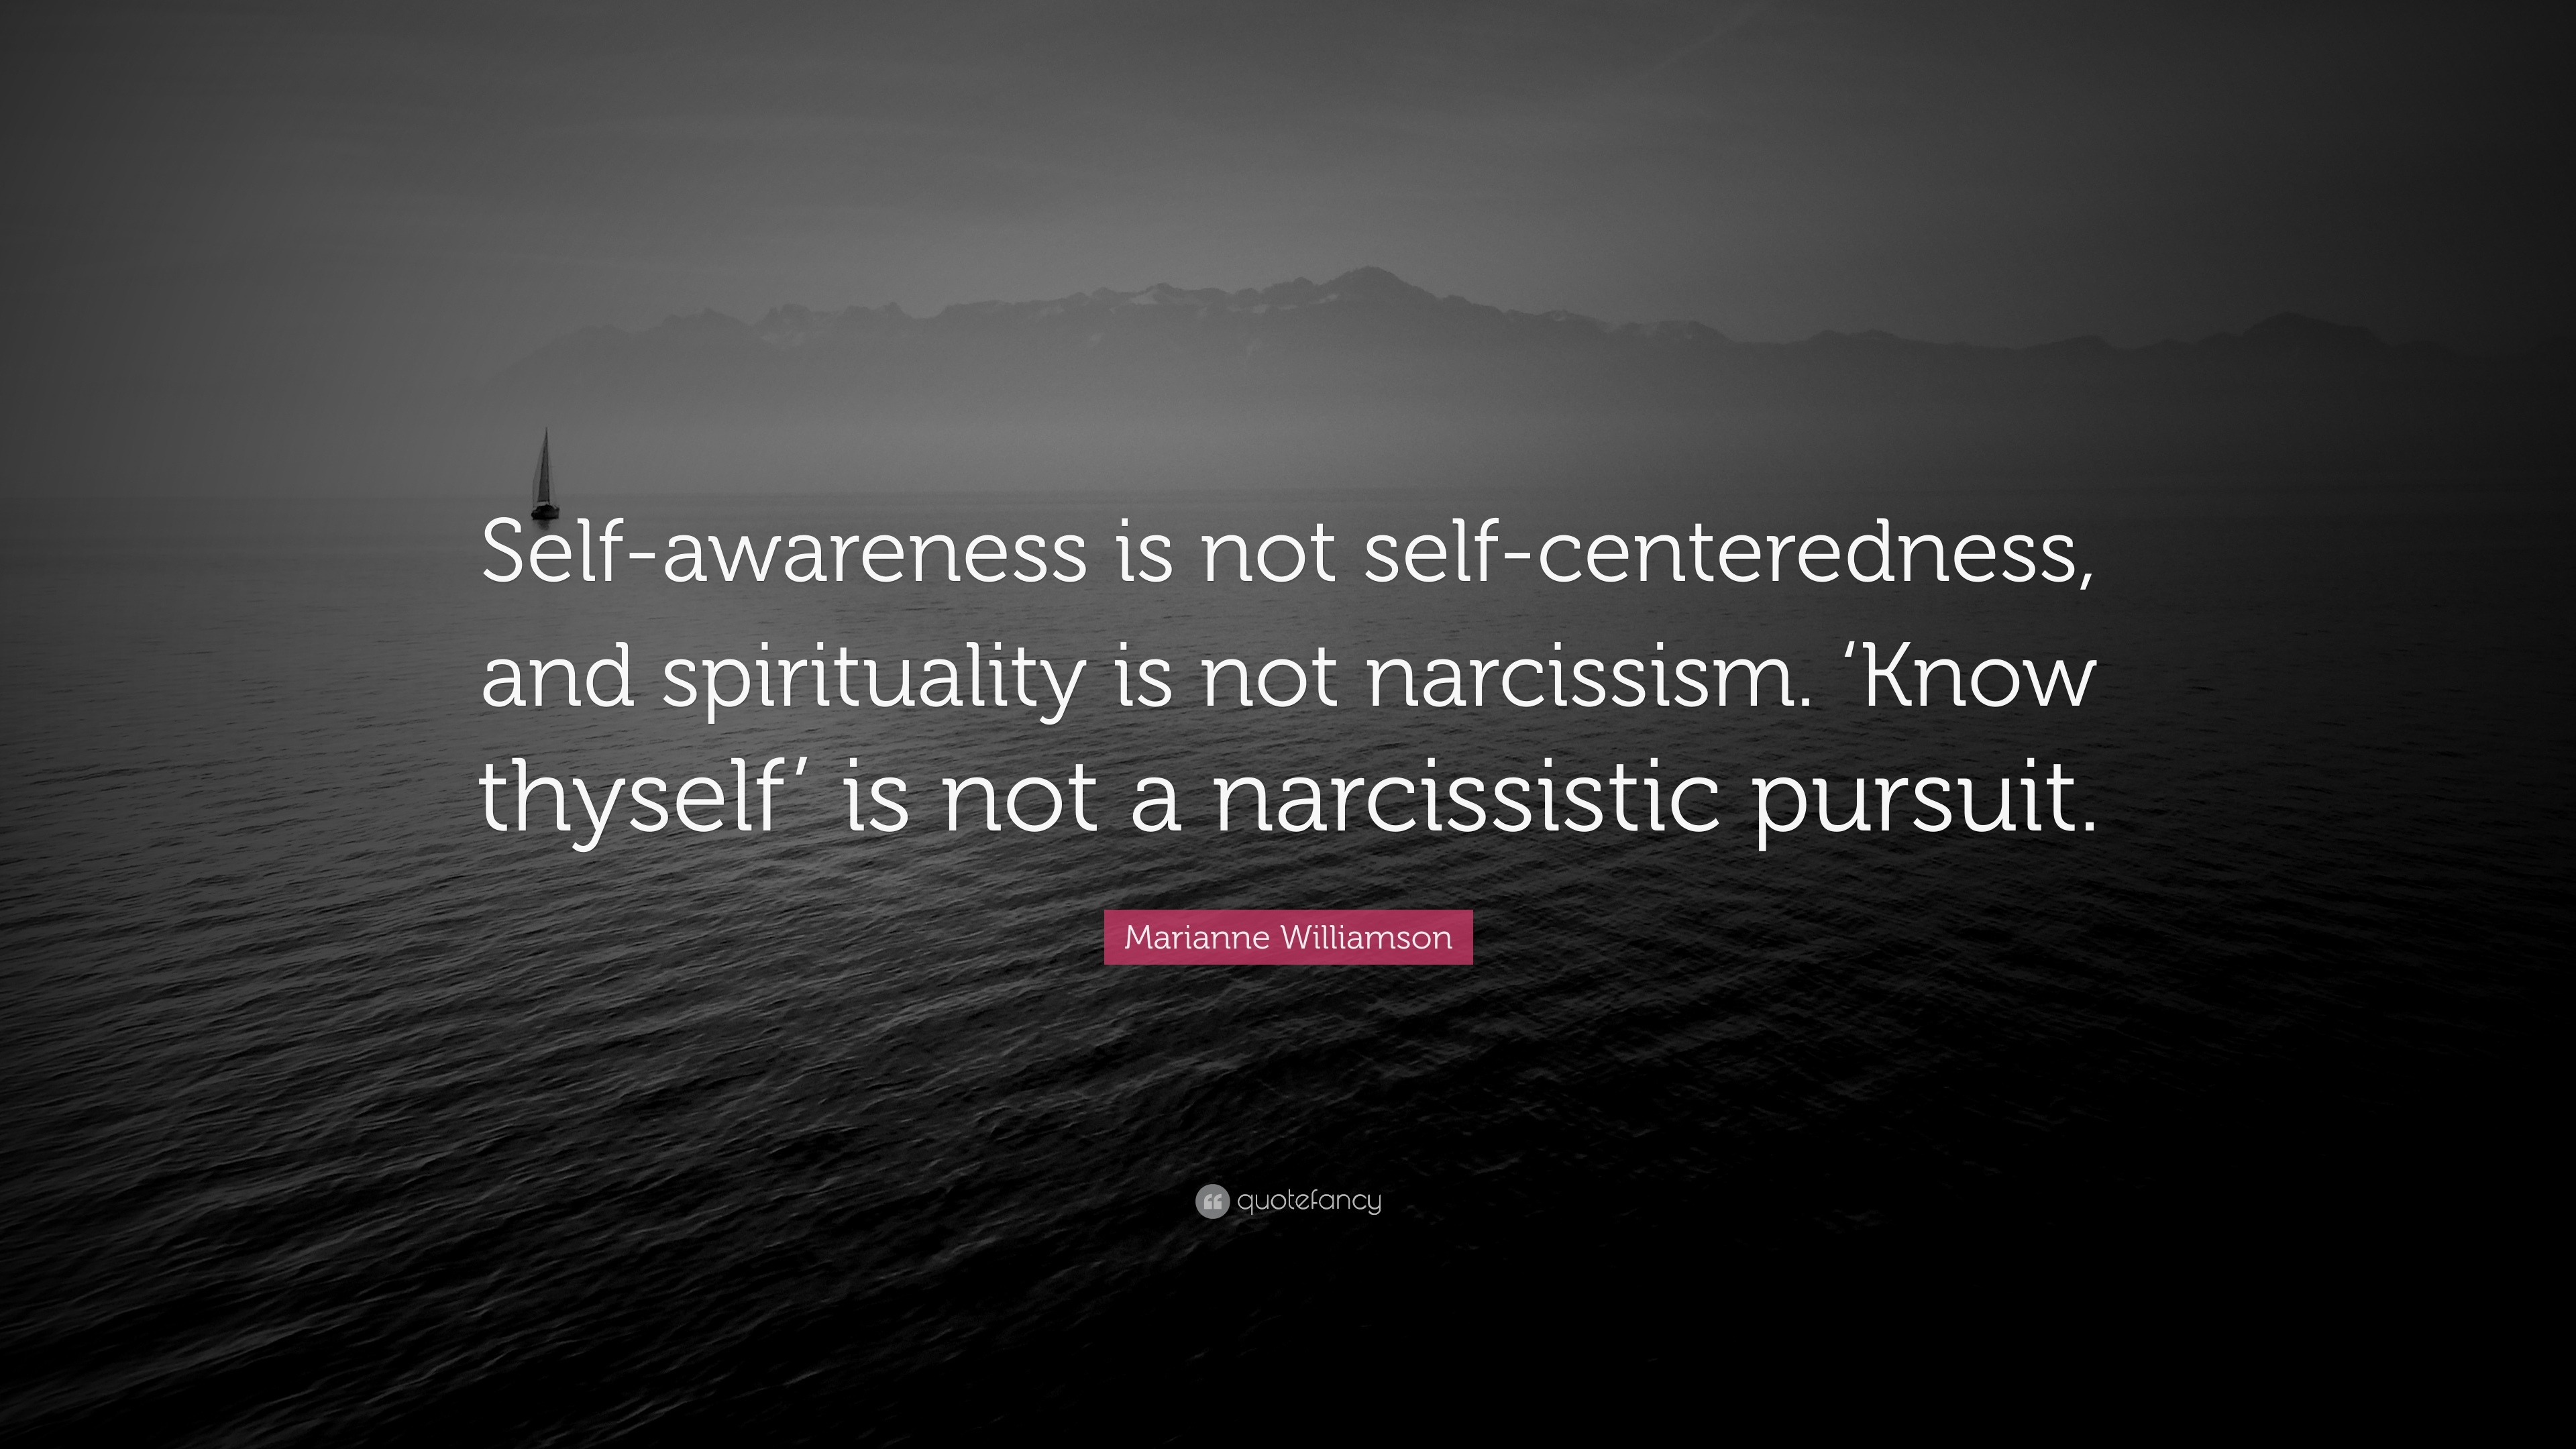 Marianne Williamson Quote Self Awareness Is Not Self Centeredness And Spirituality Is Not Narcissism Know Thyself Is Not A Narcissistic Pursui